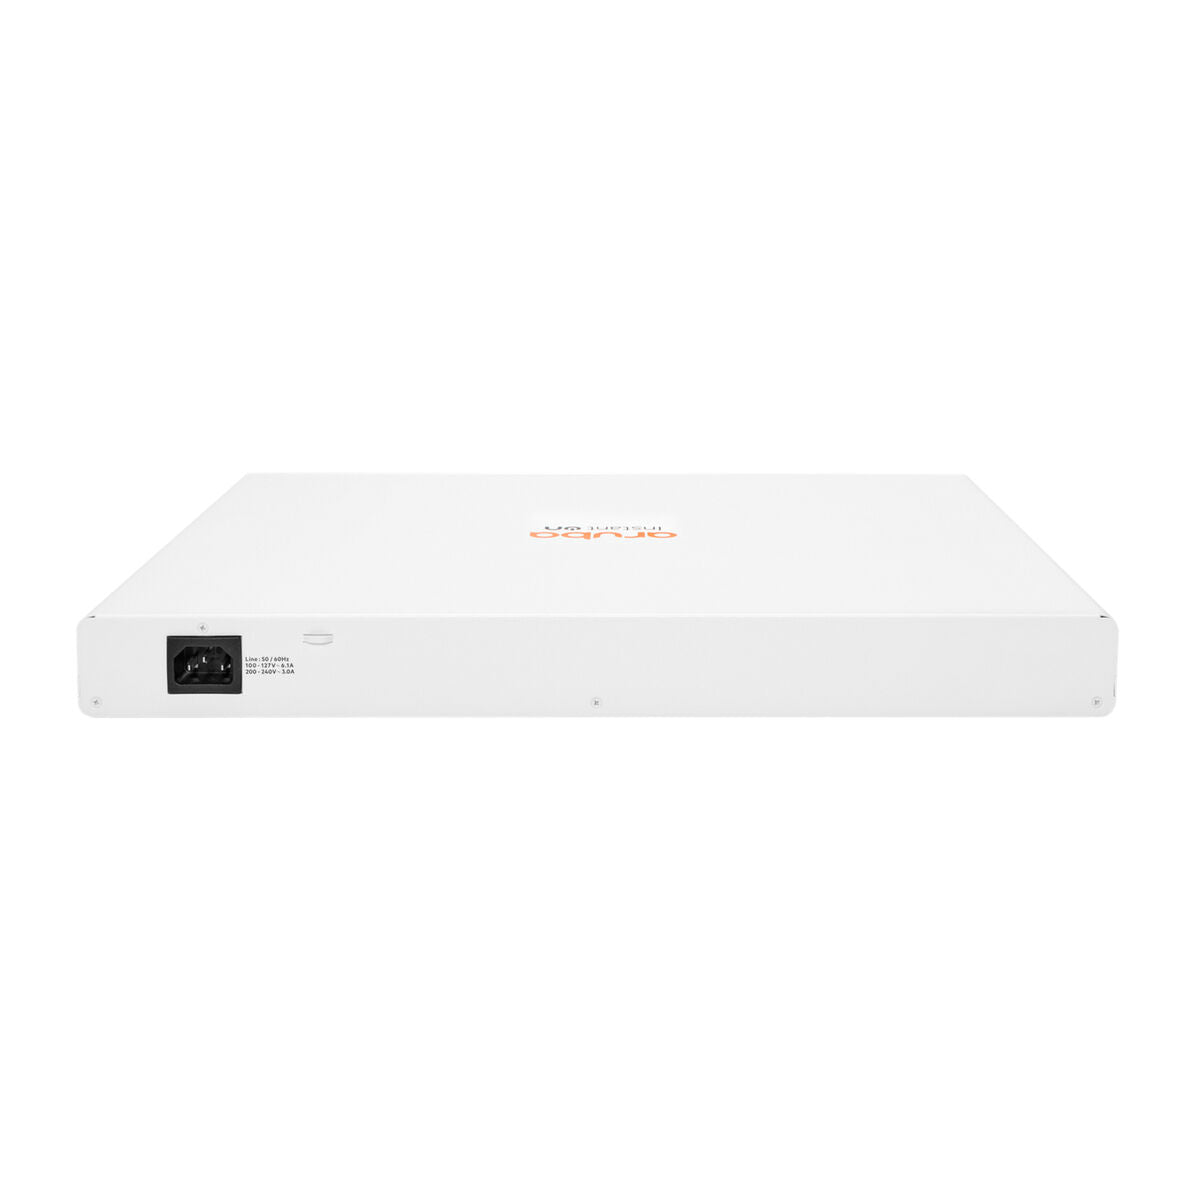 Switch HPE S0F35A, HPE, Computing, Network devices, switch-hpe-s0f35a, Brand_HPE, category-reference-2609, category-reference-2803, category-reference-2827, category-reference-t-19685, category-reference-t-19914, category-reference-t-21367, Condition_NEW, networks/wiring, Price_+ 1000, Teleworking, RiotNook